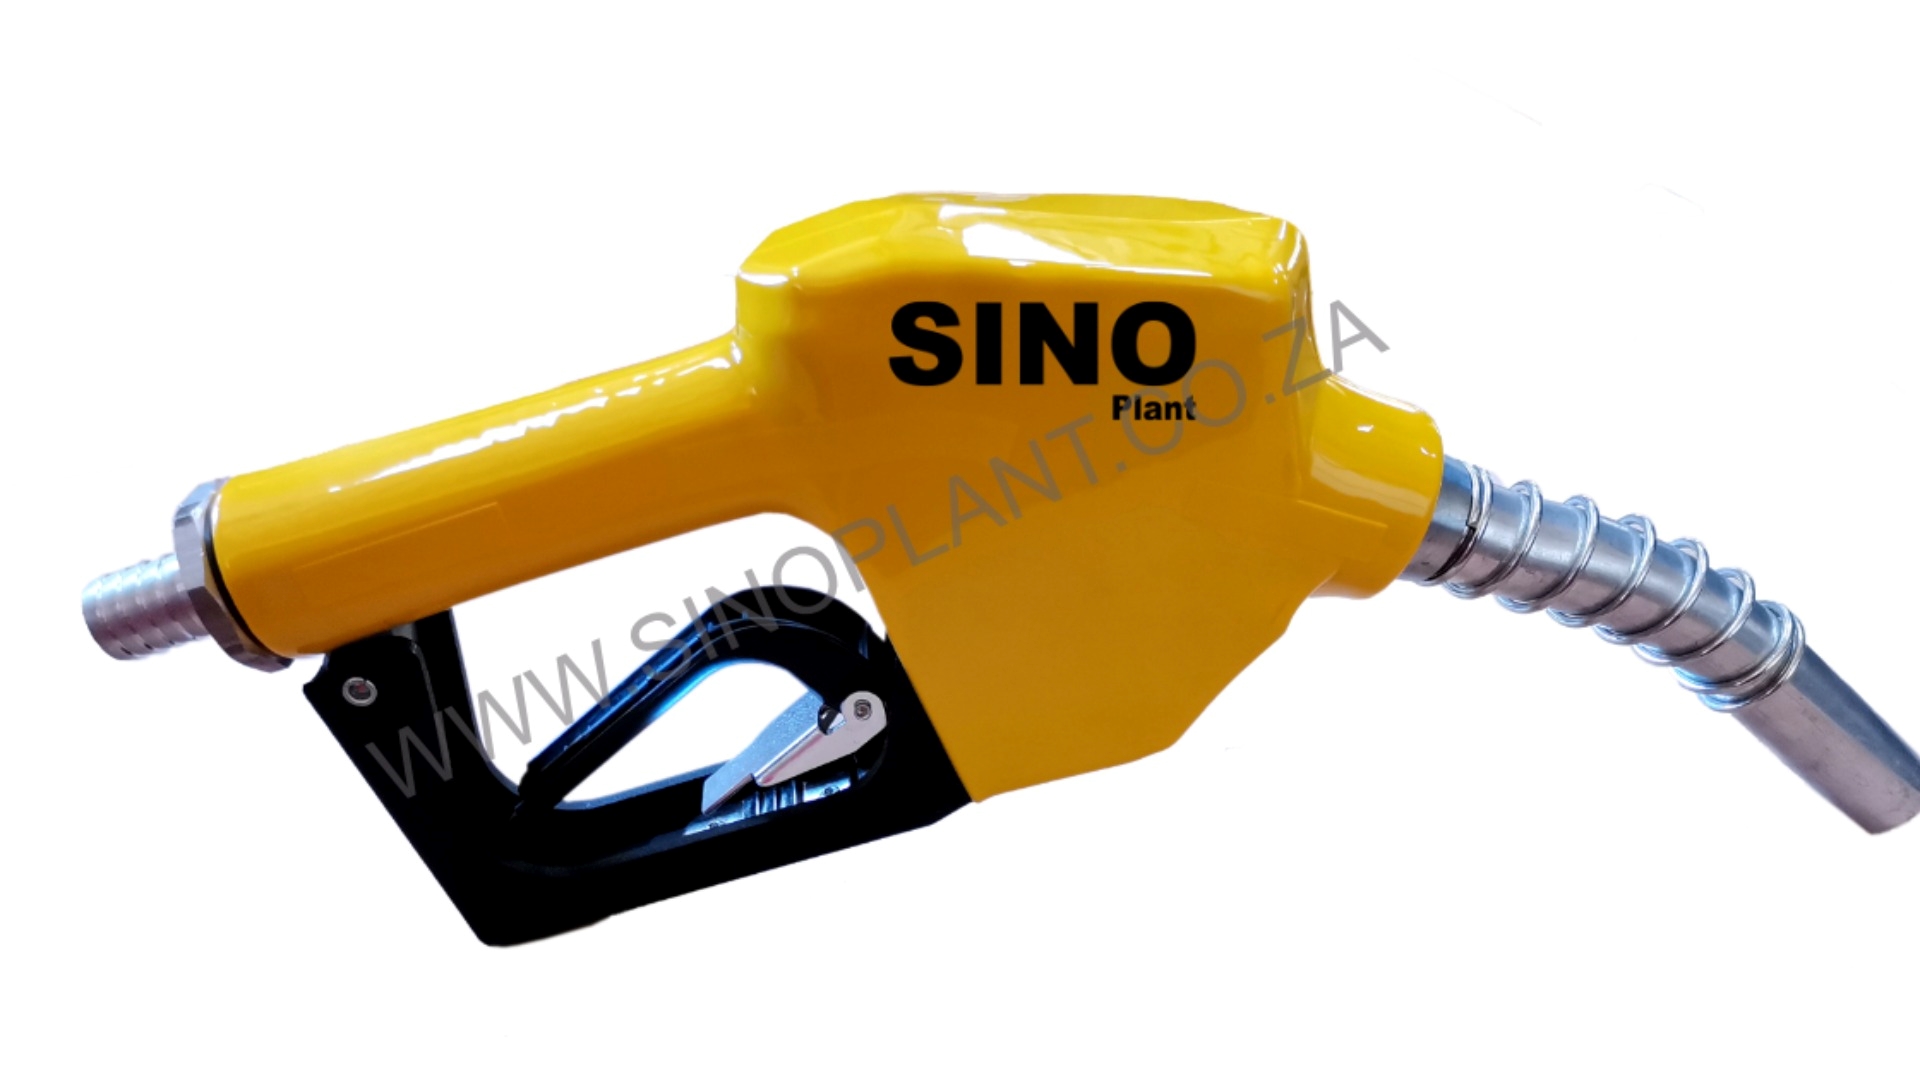 Sino Plant Fuel pumps Fuel Nozzle – Manual Stop 3/4" / 19mm 2022 for sale by Sino Plant | Truck & Trailer Marketplaces